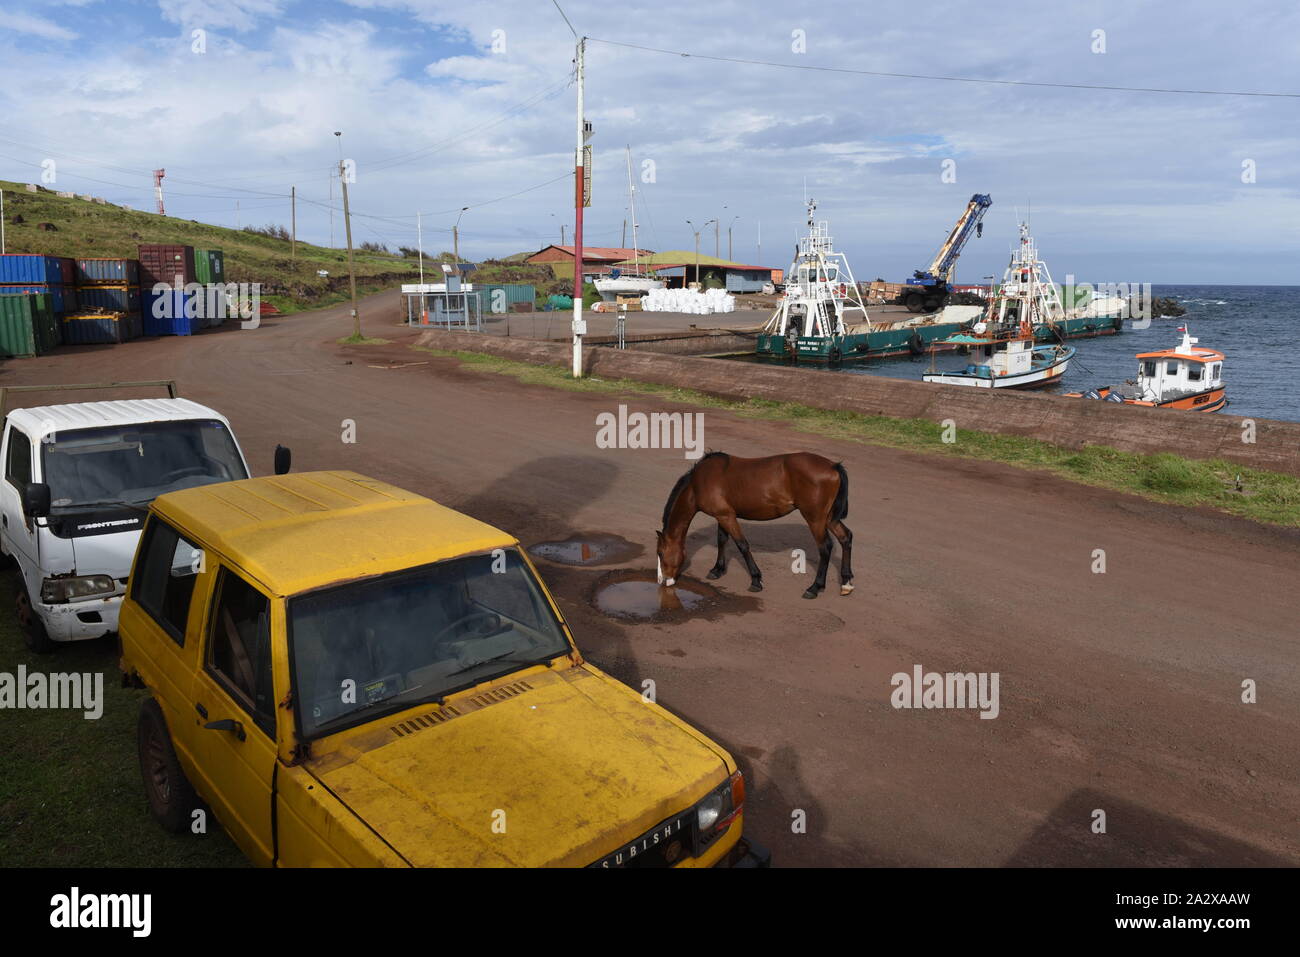 Easter Island, Chile. 22nd Sep, 2019. A horse is seen drinking water at the  small village of Hanga Roa.The population of wild horses on Easter Island,  also known as Rapa Nui, a